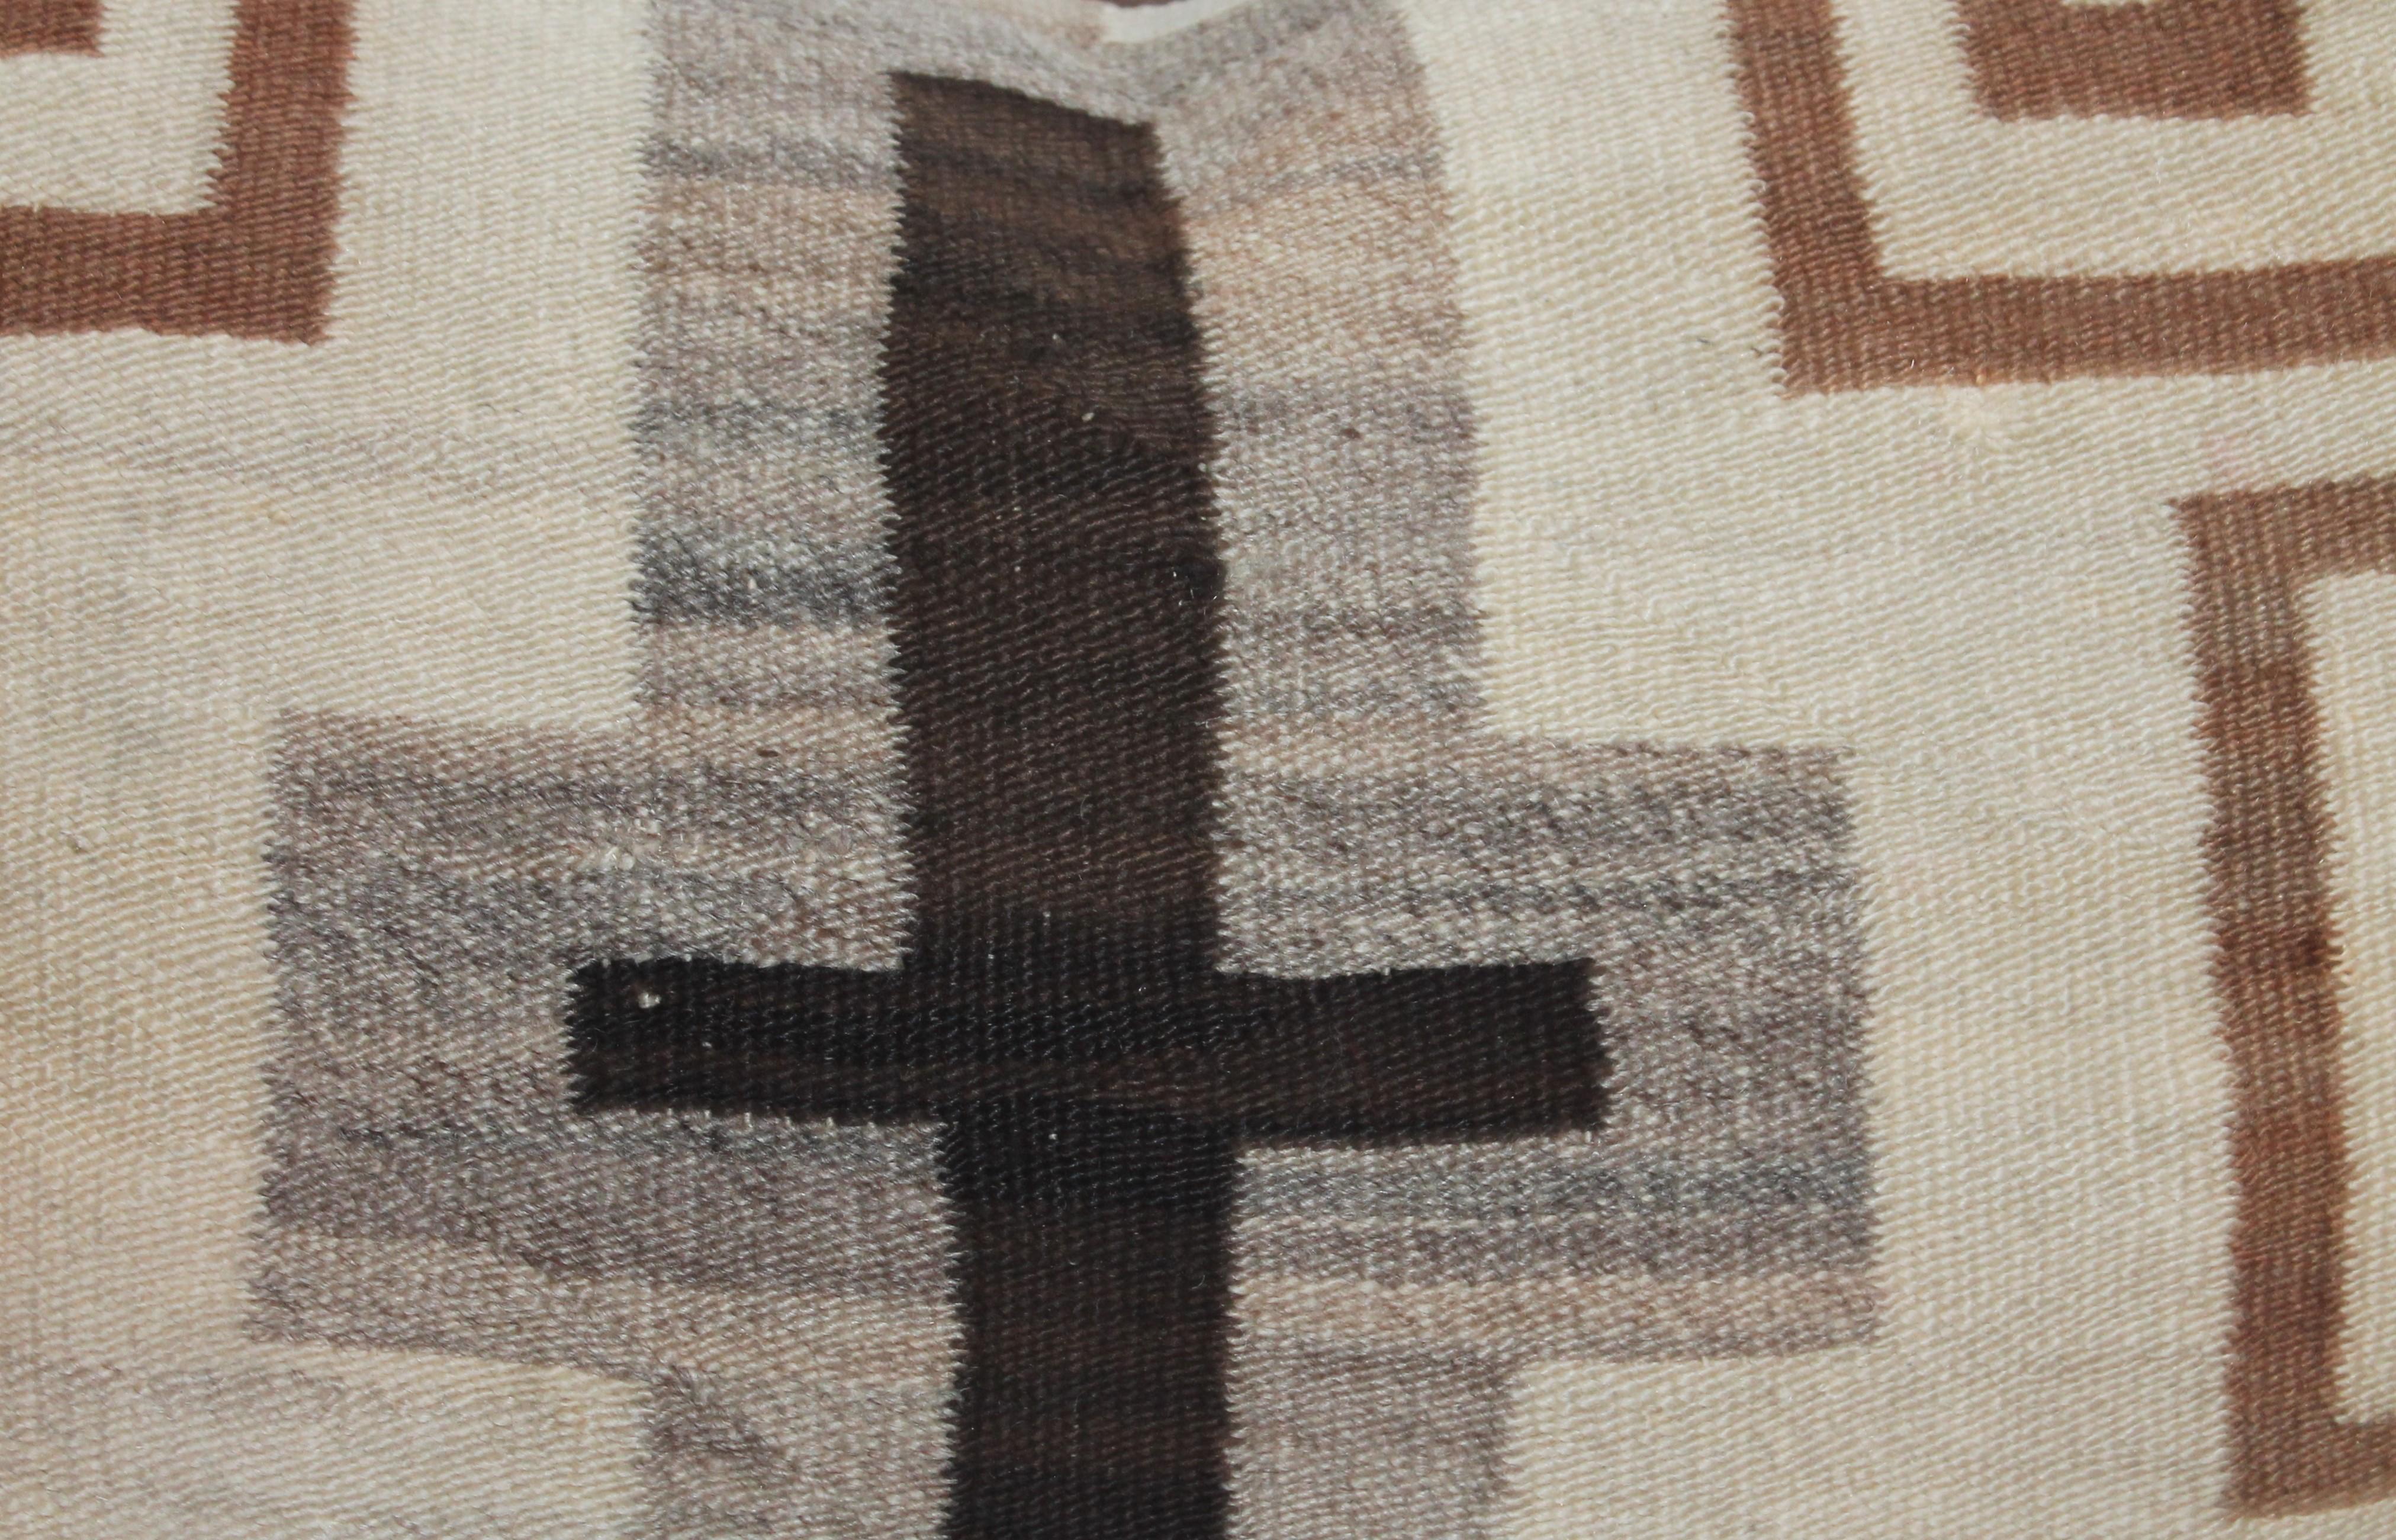 This fine early Navajo Indian weaving with a cross in the centre. The backing is in dark brown cotton linen. This is a transitional weaving.